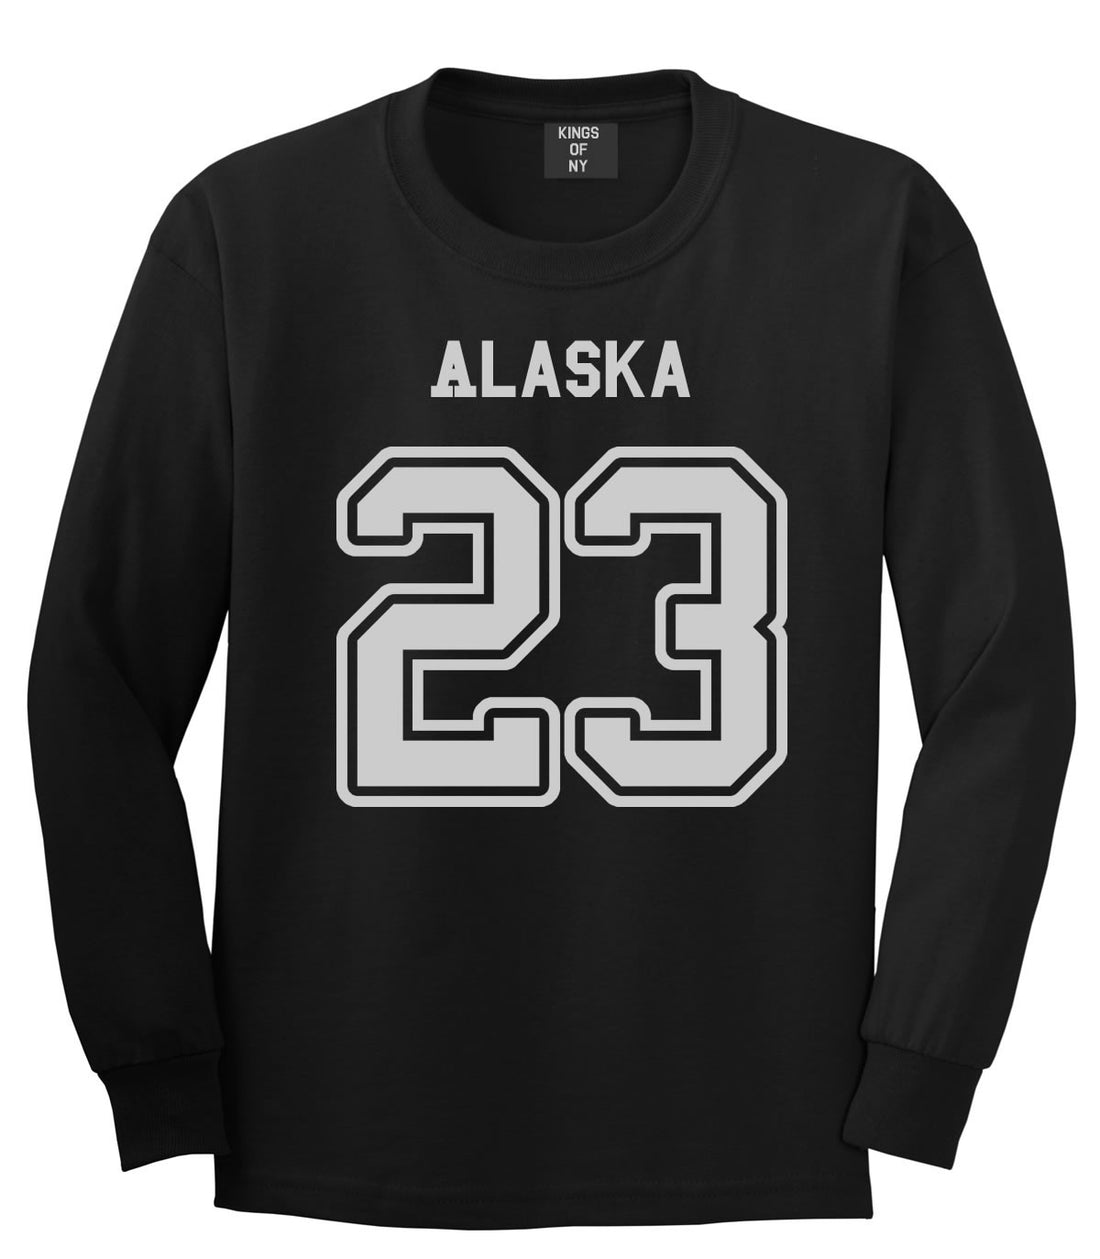 Sport Style Alaska 23 Team State Jersey Long Sleeve T-Shirt By Kings Of NY